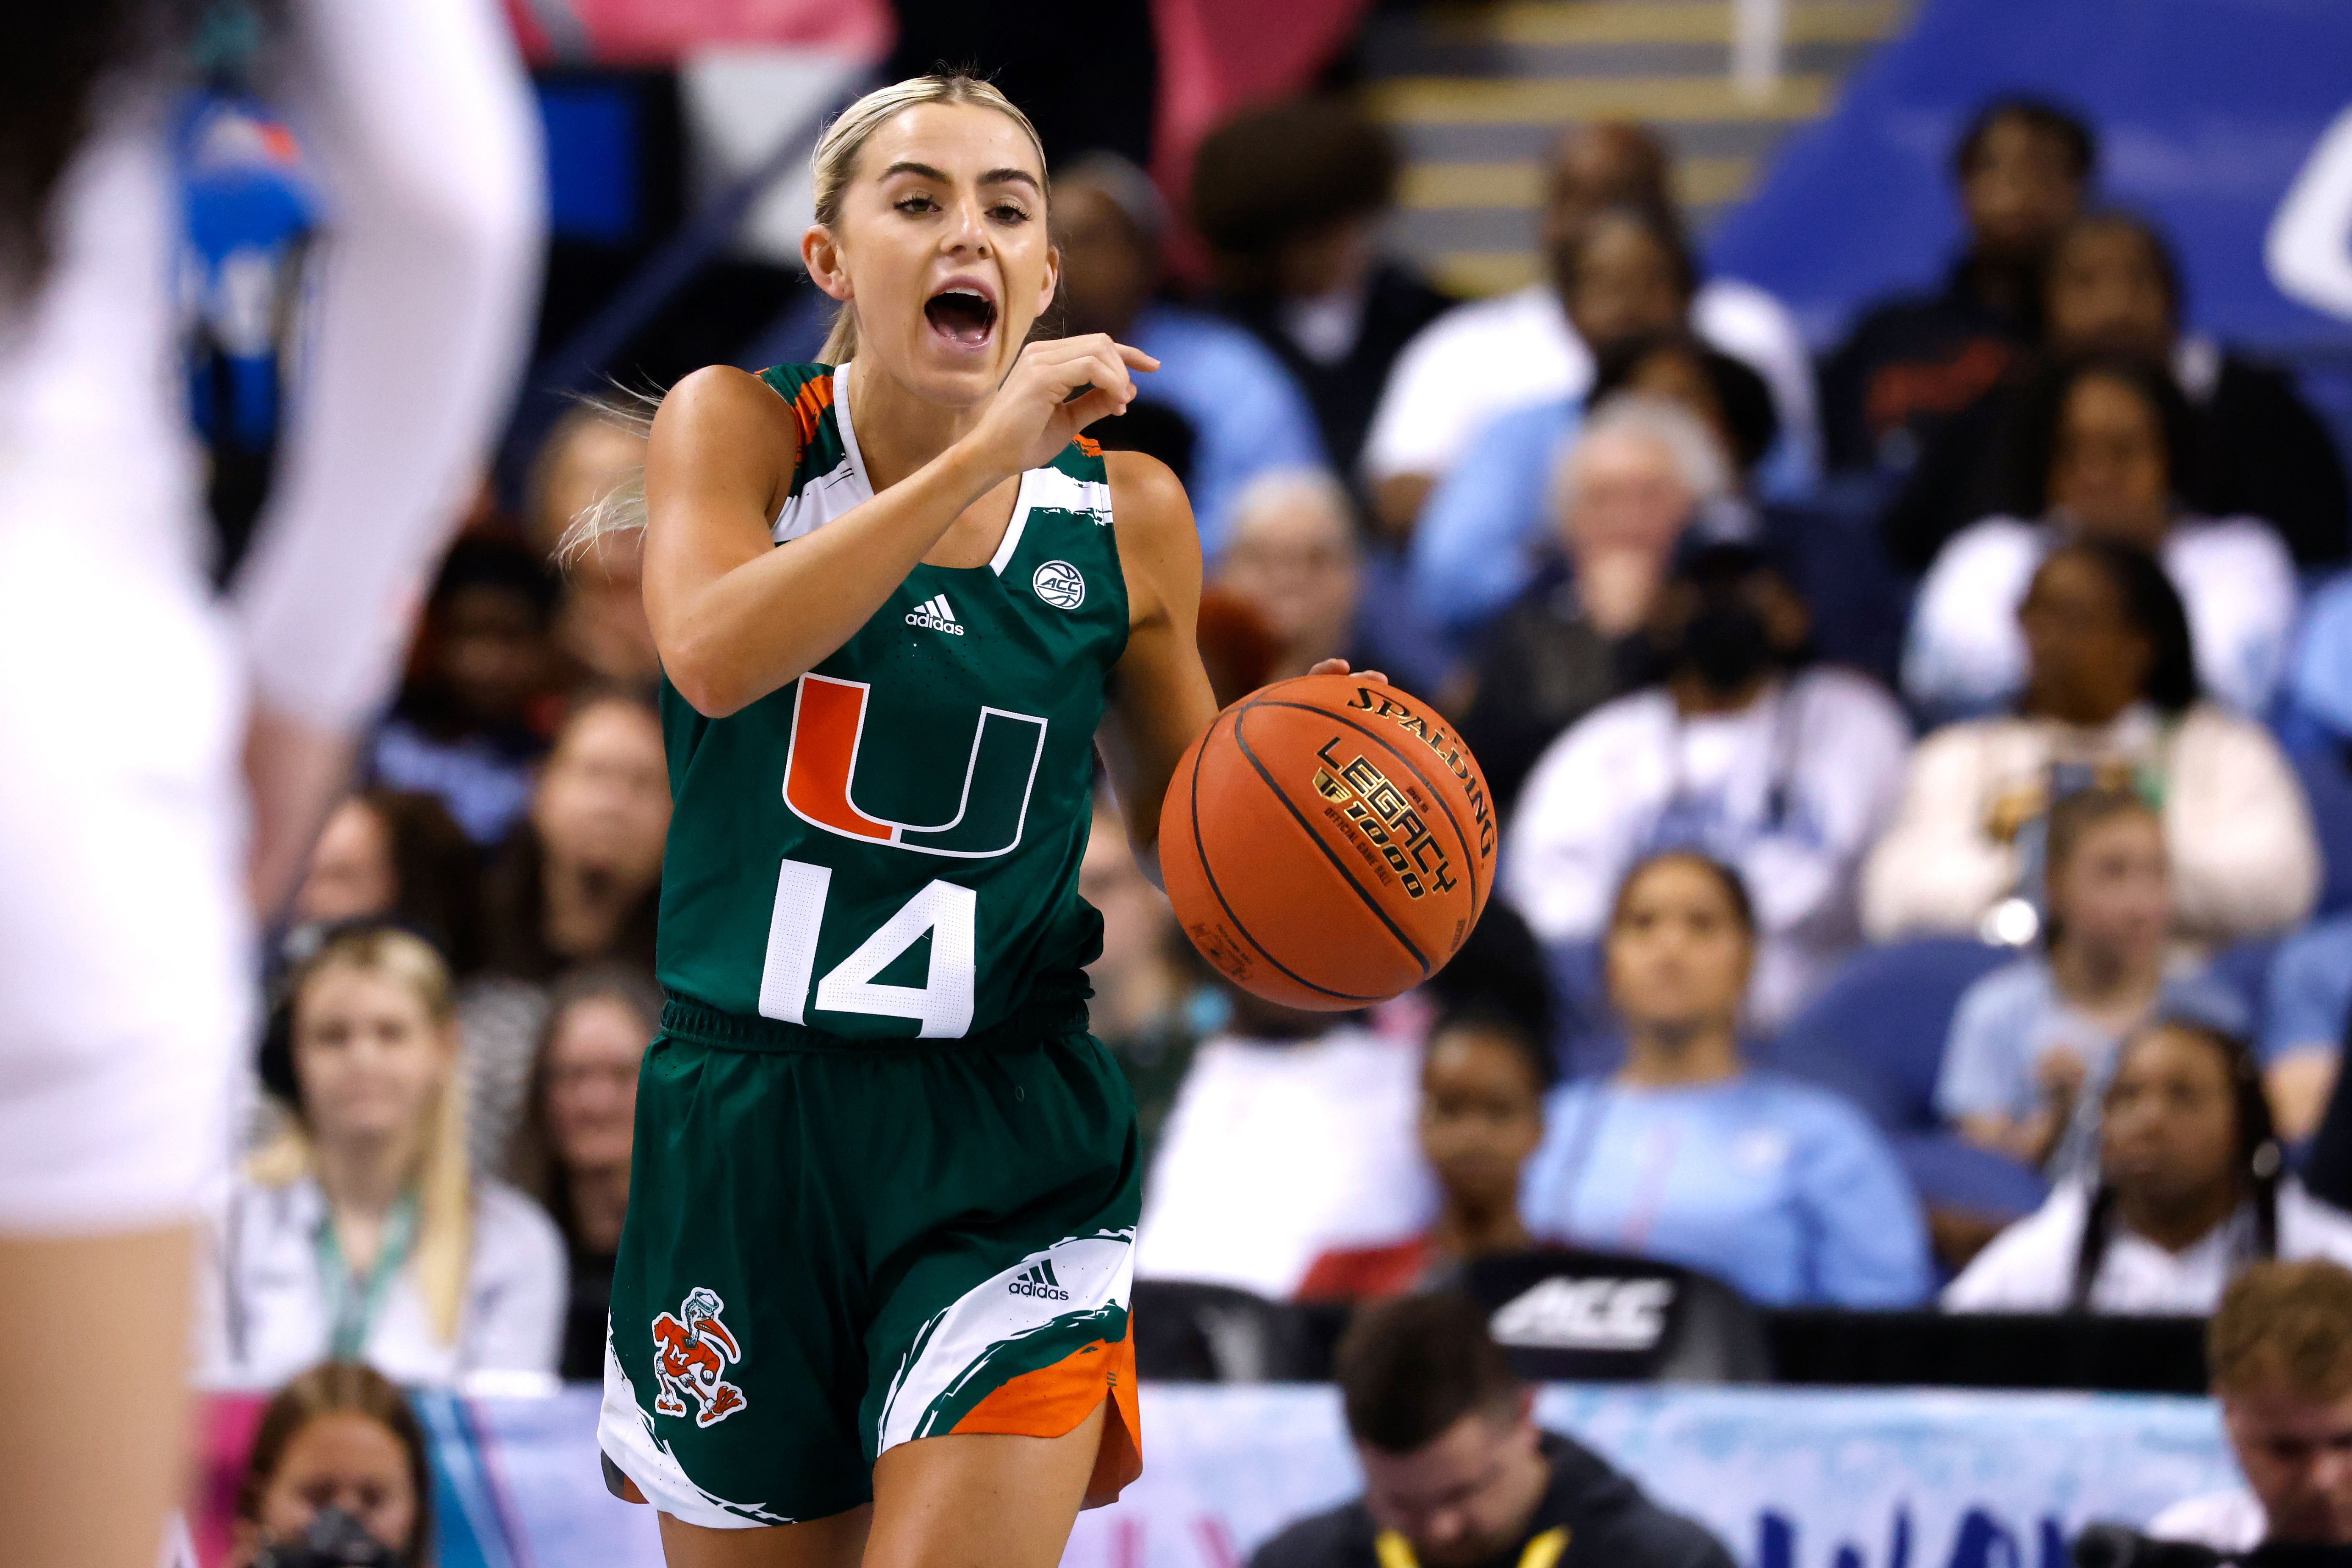 Haley Cavinder playing for Miami Hurricanes